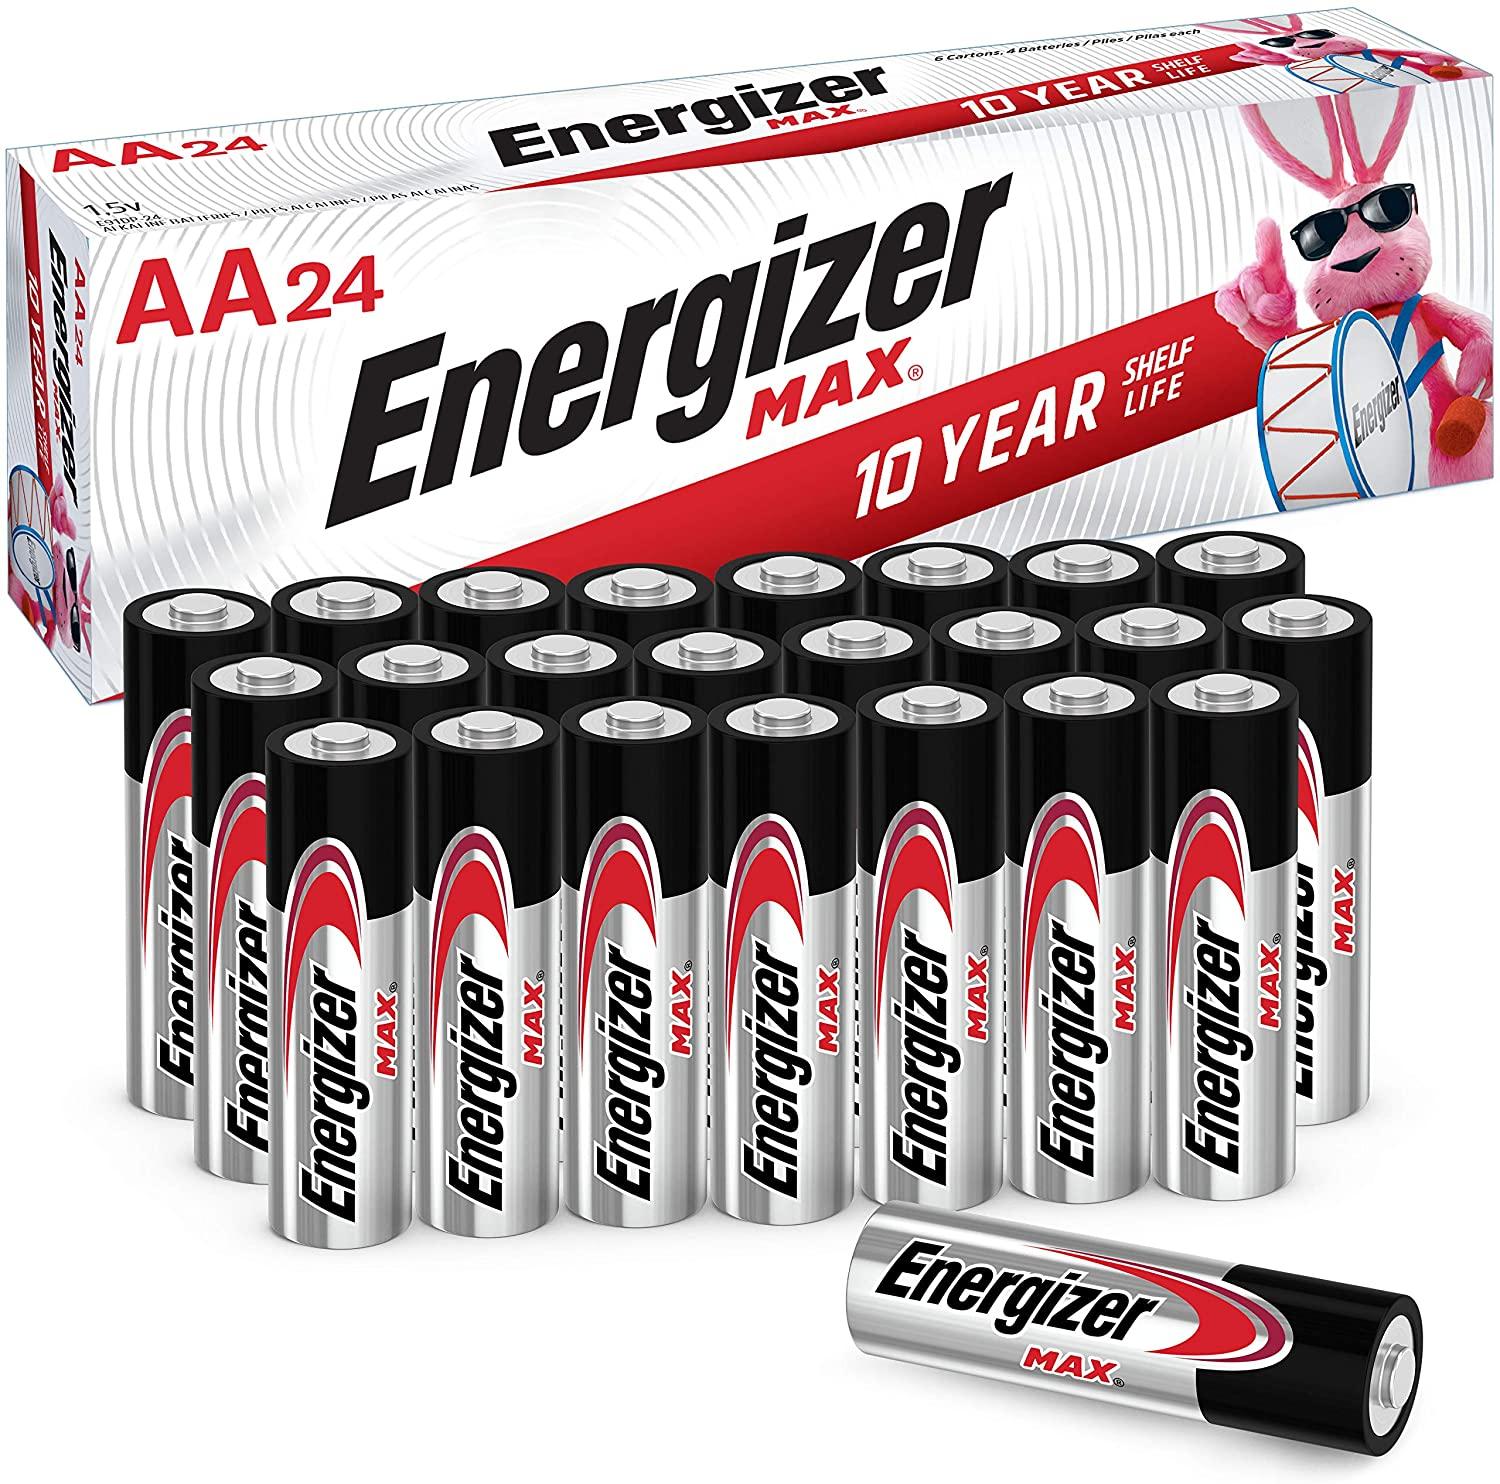 24 Energizer AA Batteries Double A Max Alkaline Batteries for $12.18 Shipped